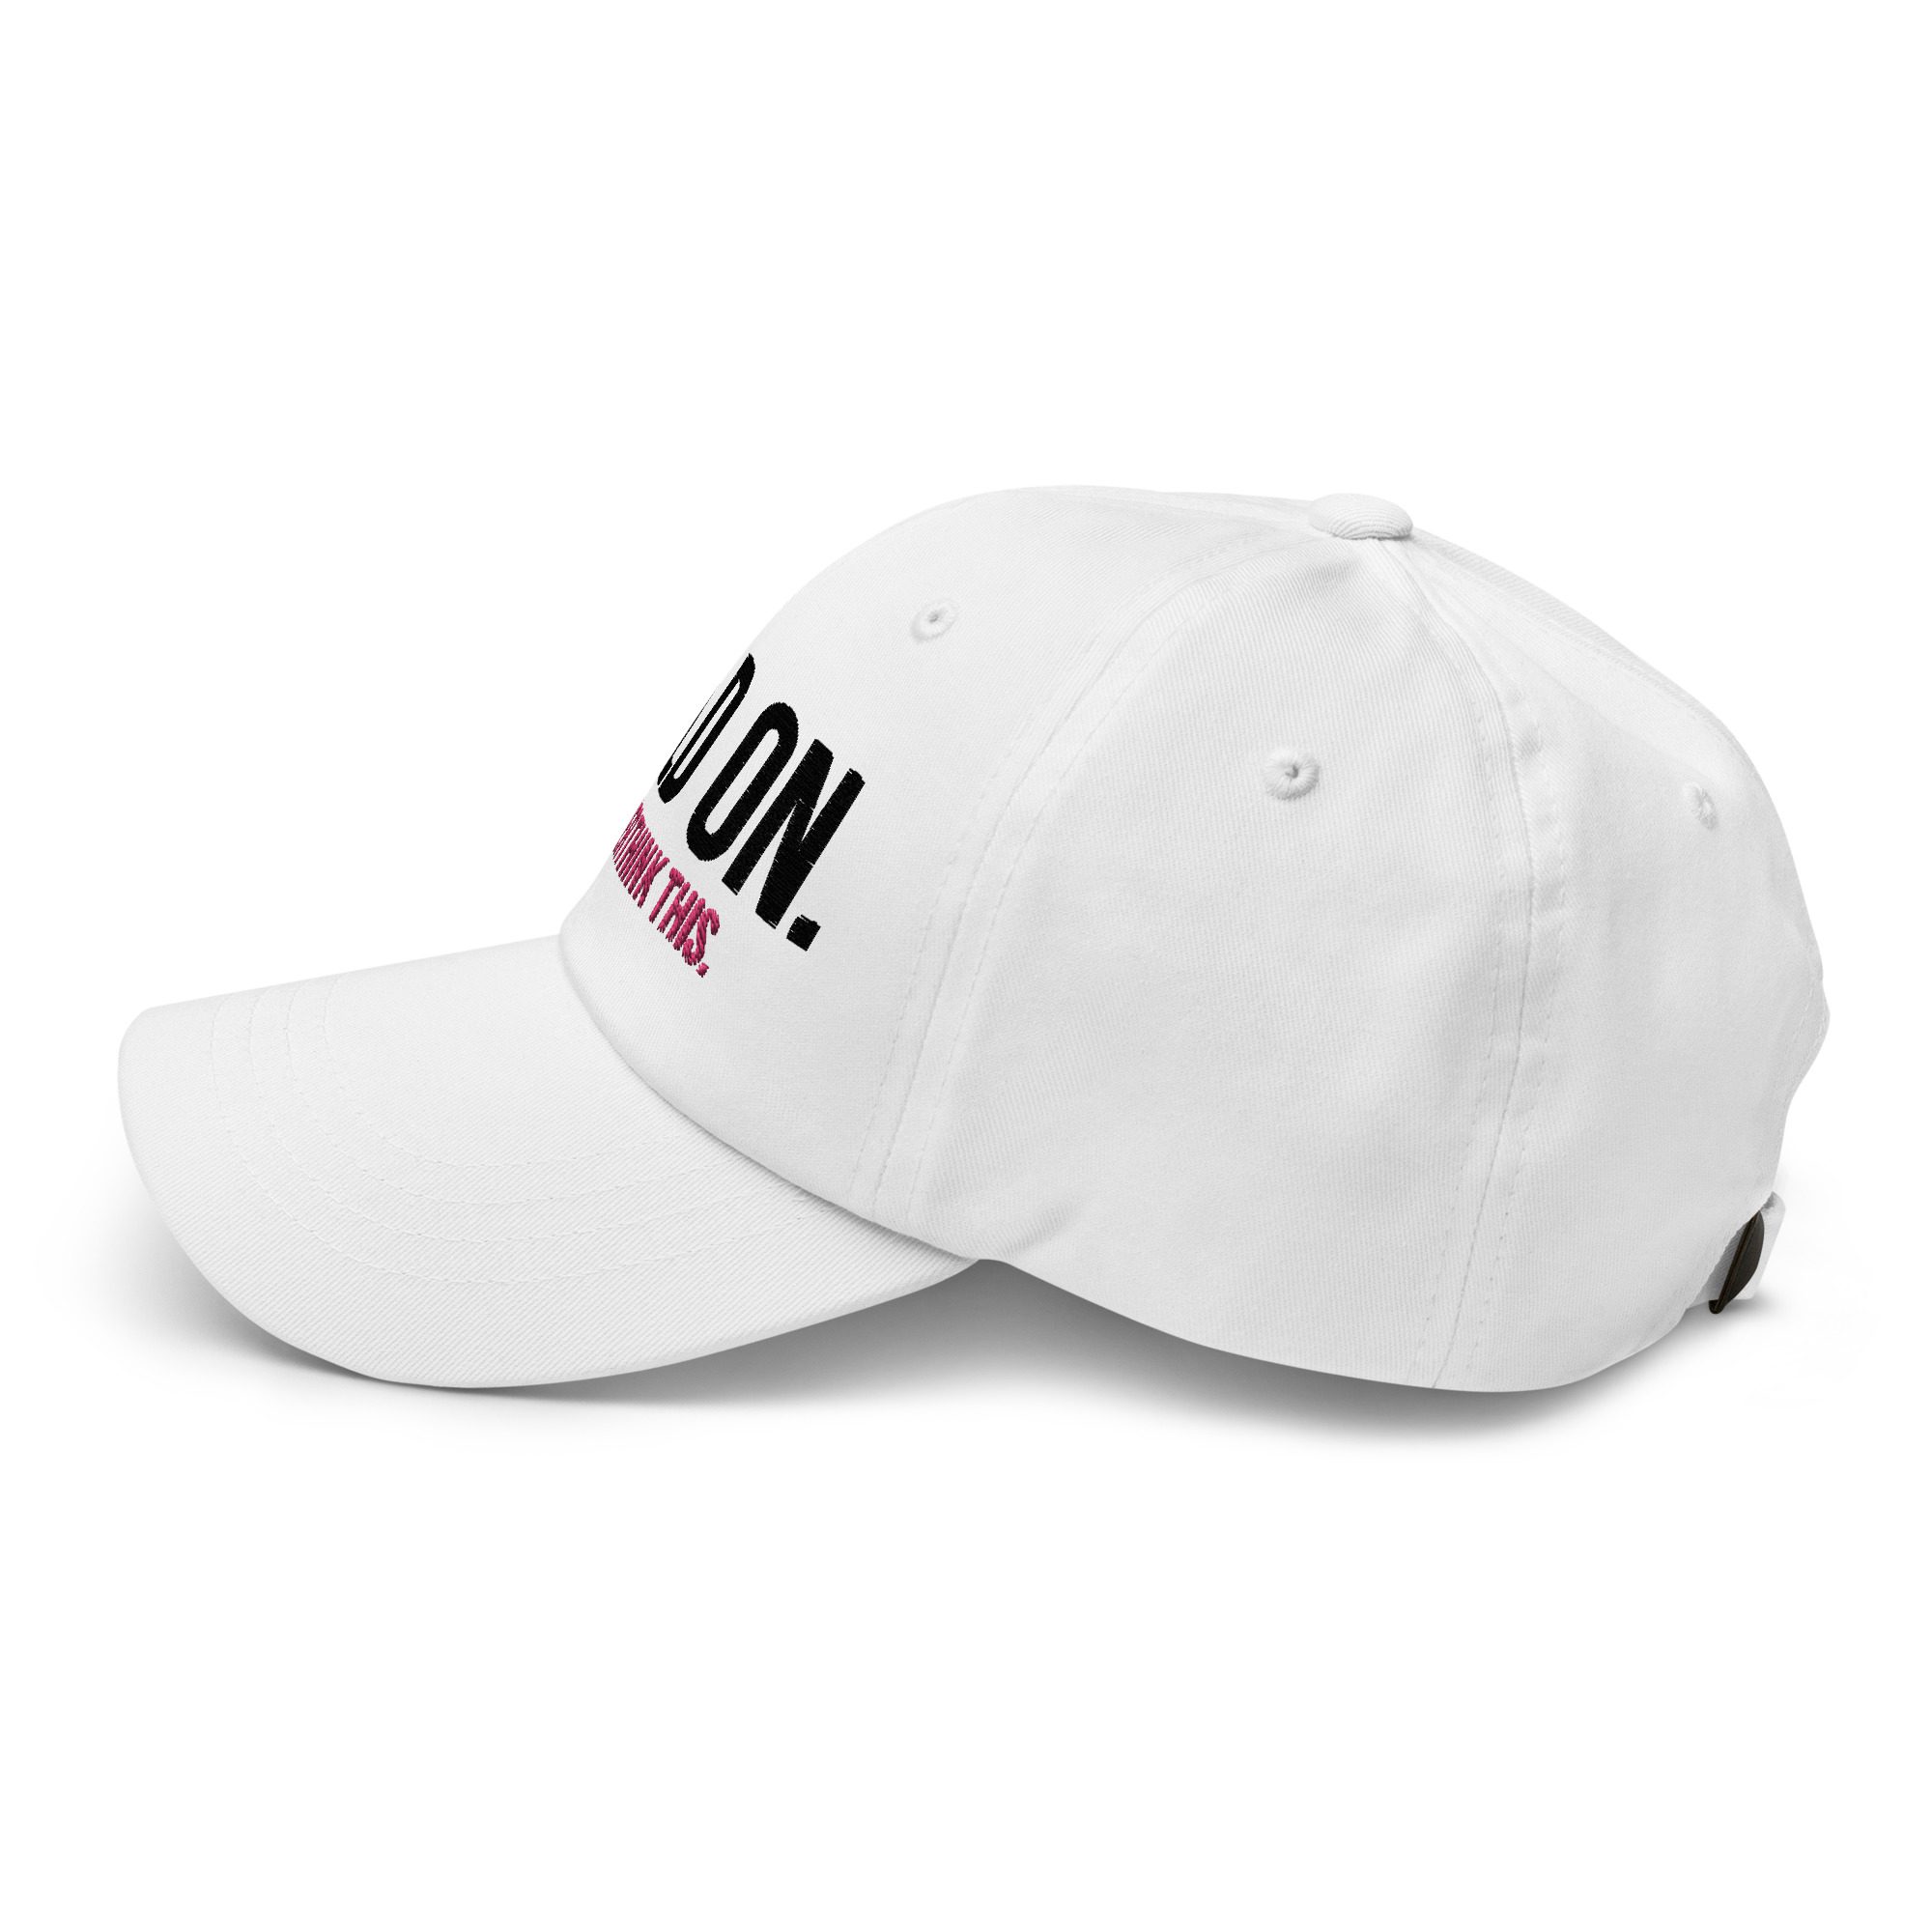 Hold On Let Me Overthink This Dad Hat